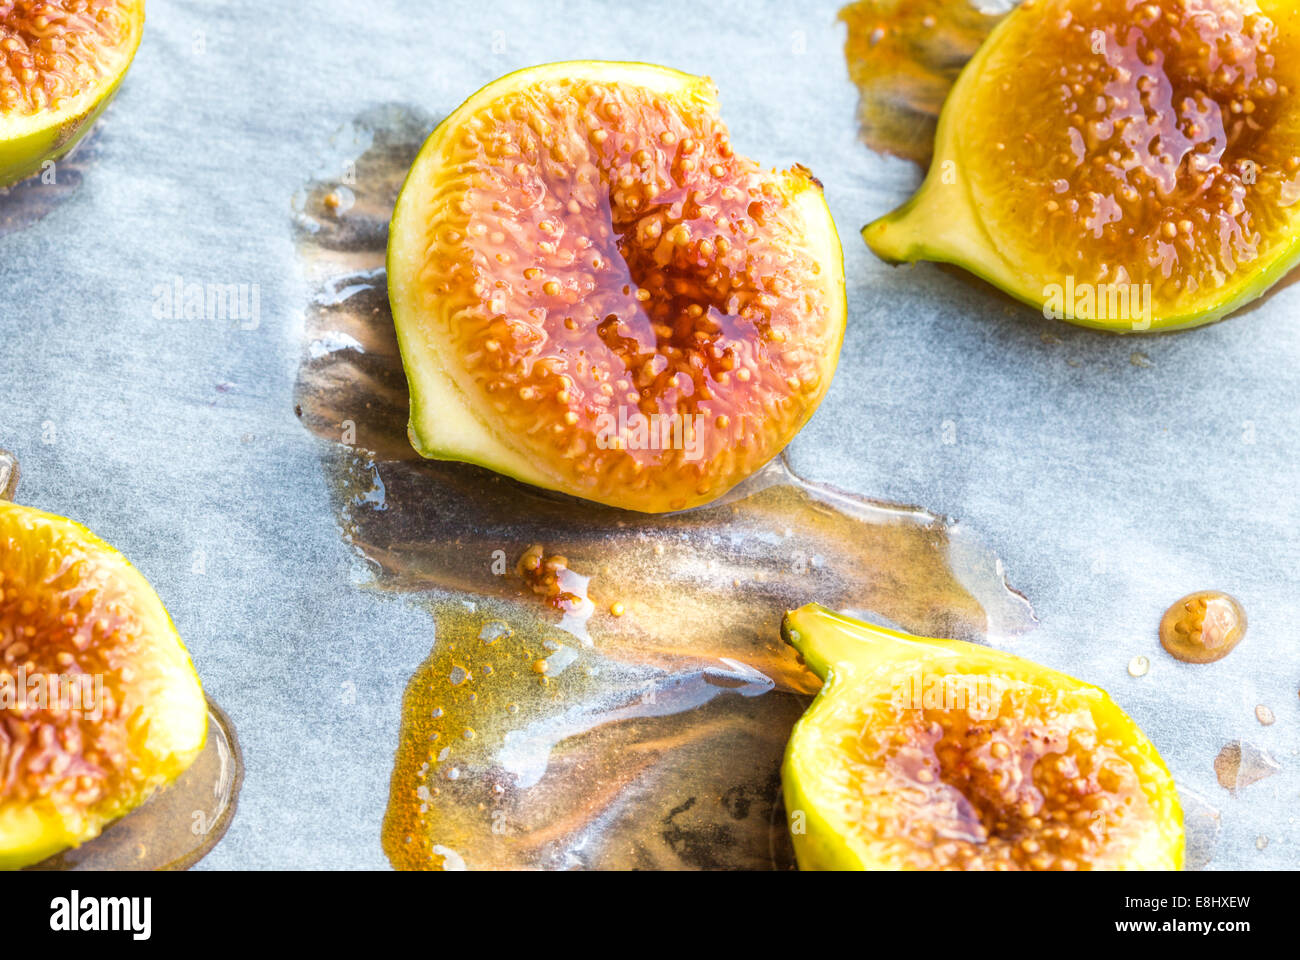 oven roasted green figs on baking paper showing drizzled honey Stock Photo